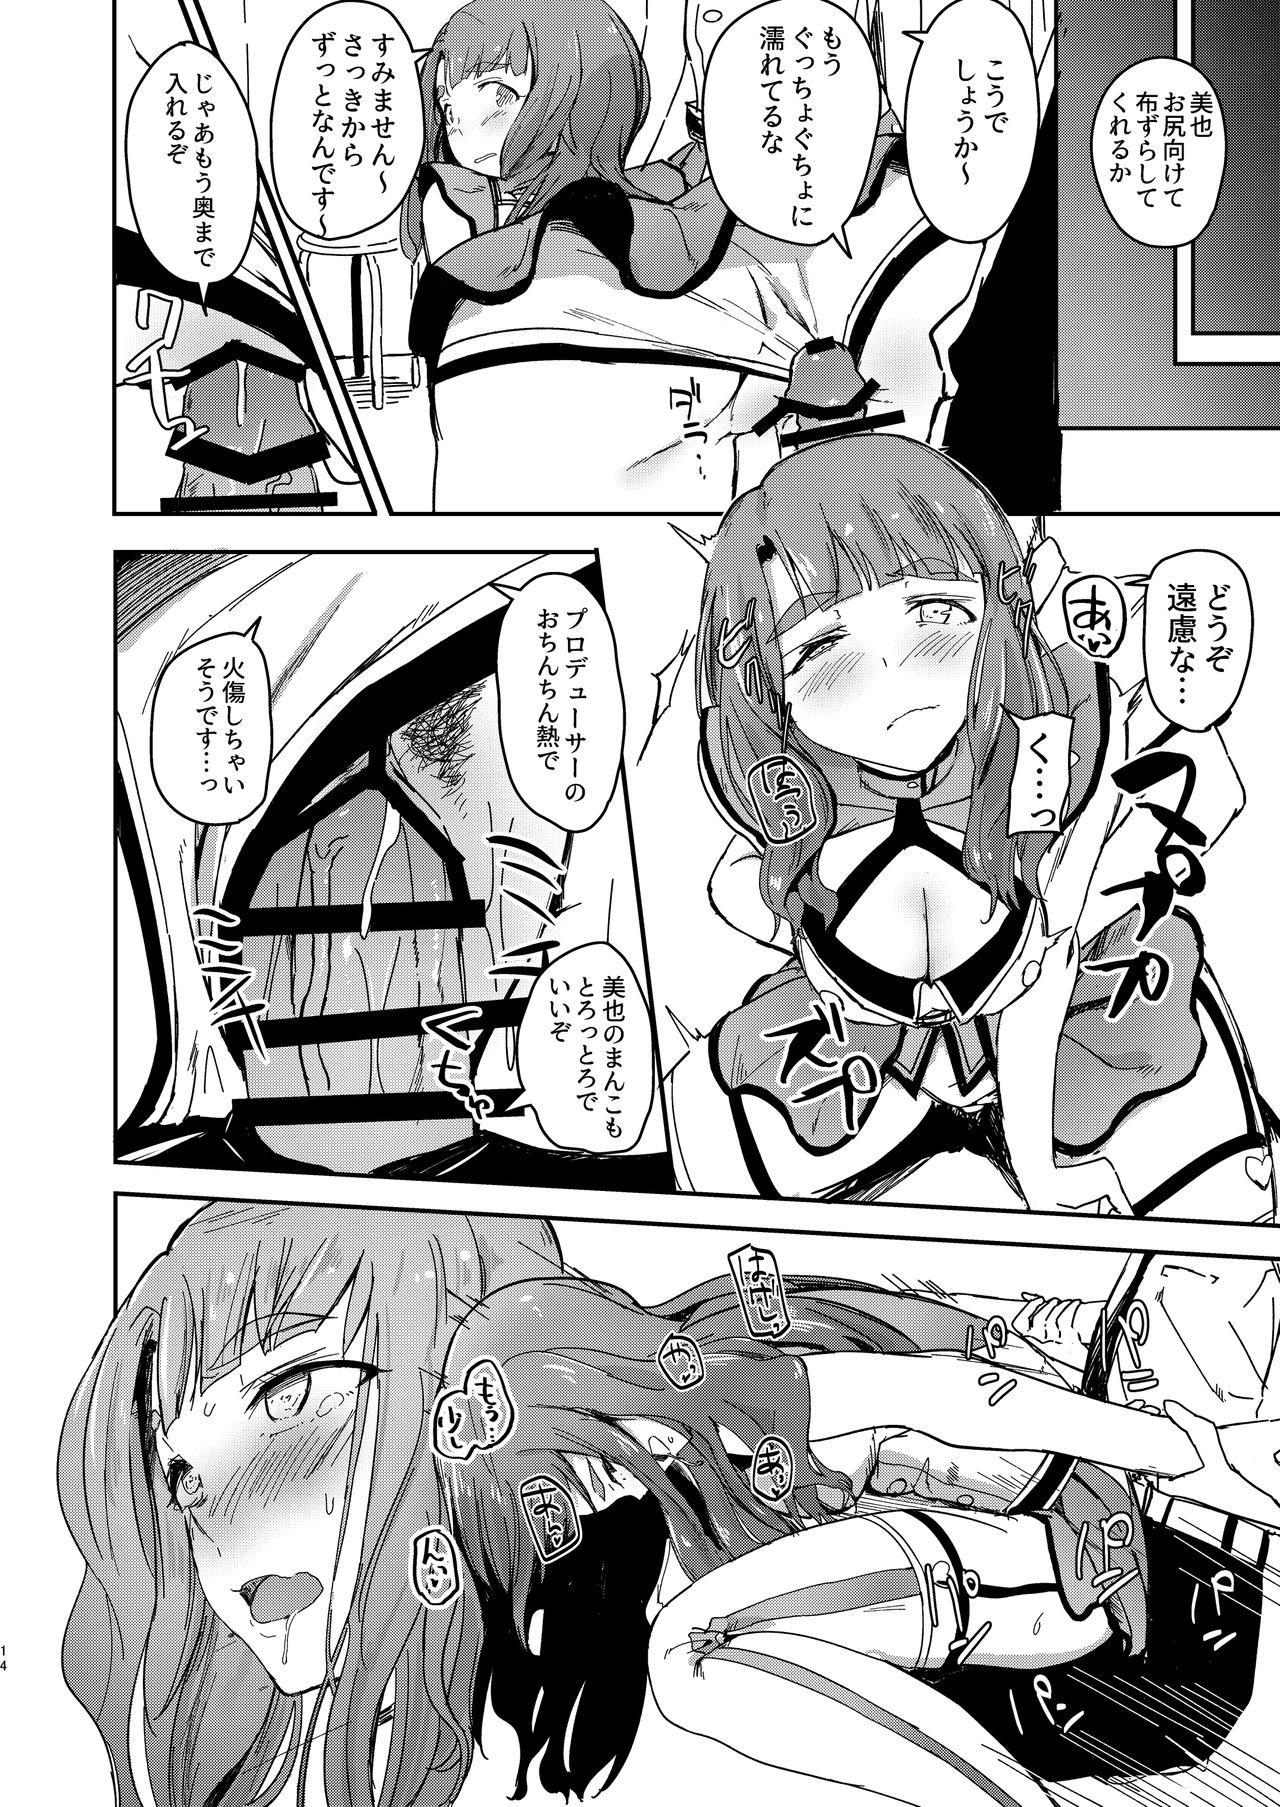 Love Making TOP! CLOVER BOOK + omake - The idolmaster Plumper - Page 13